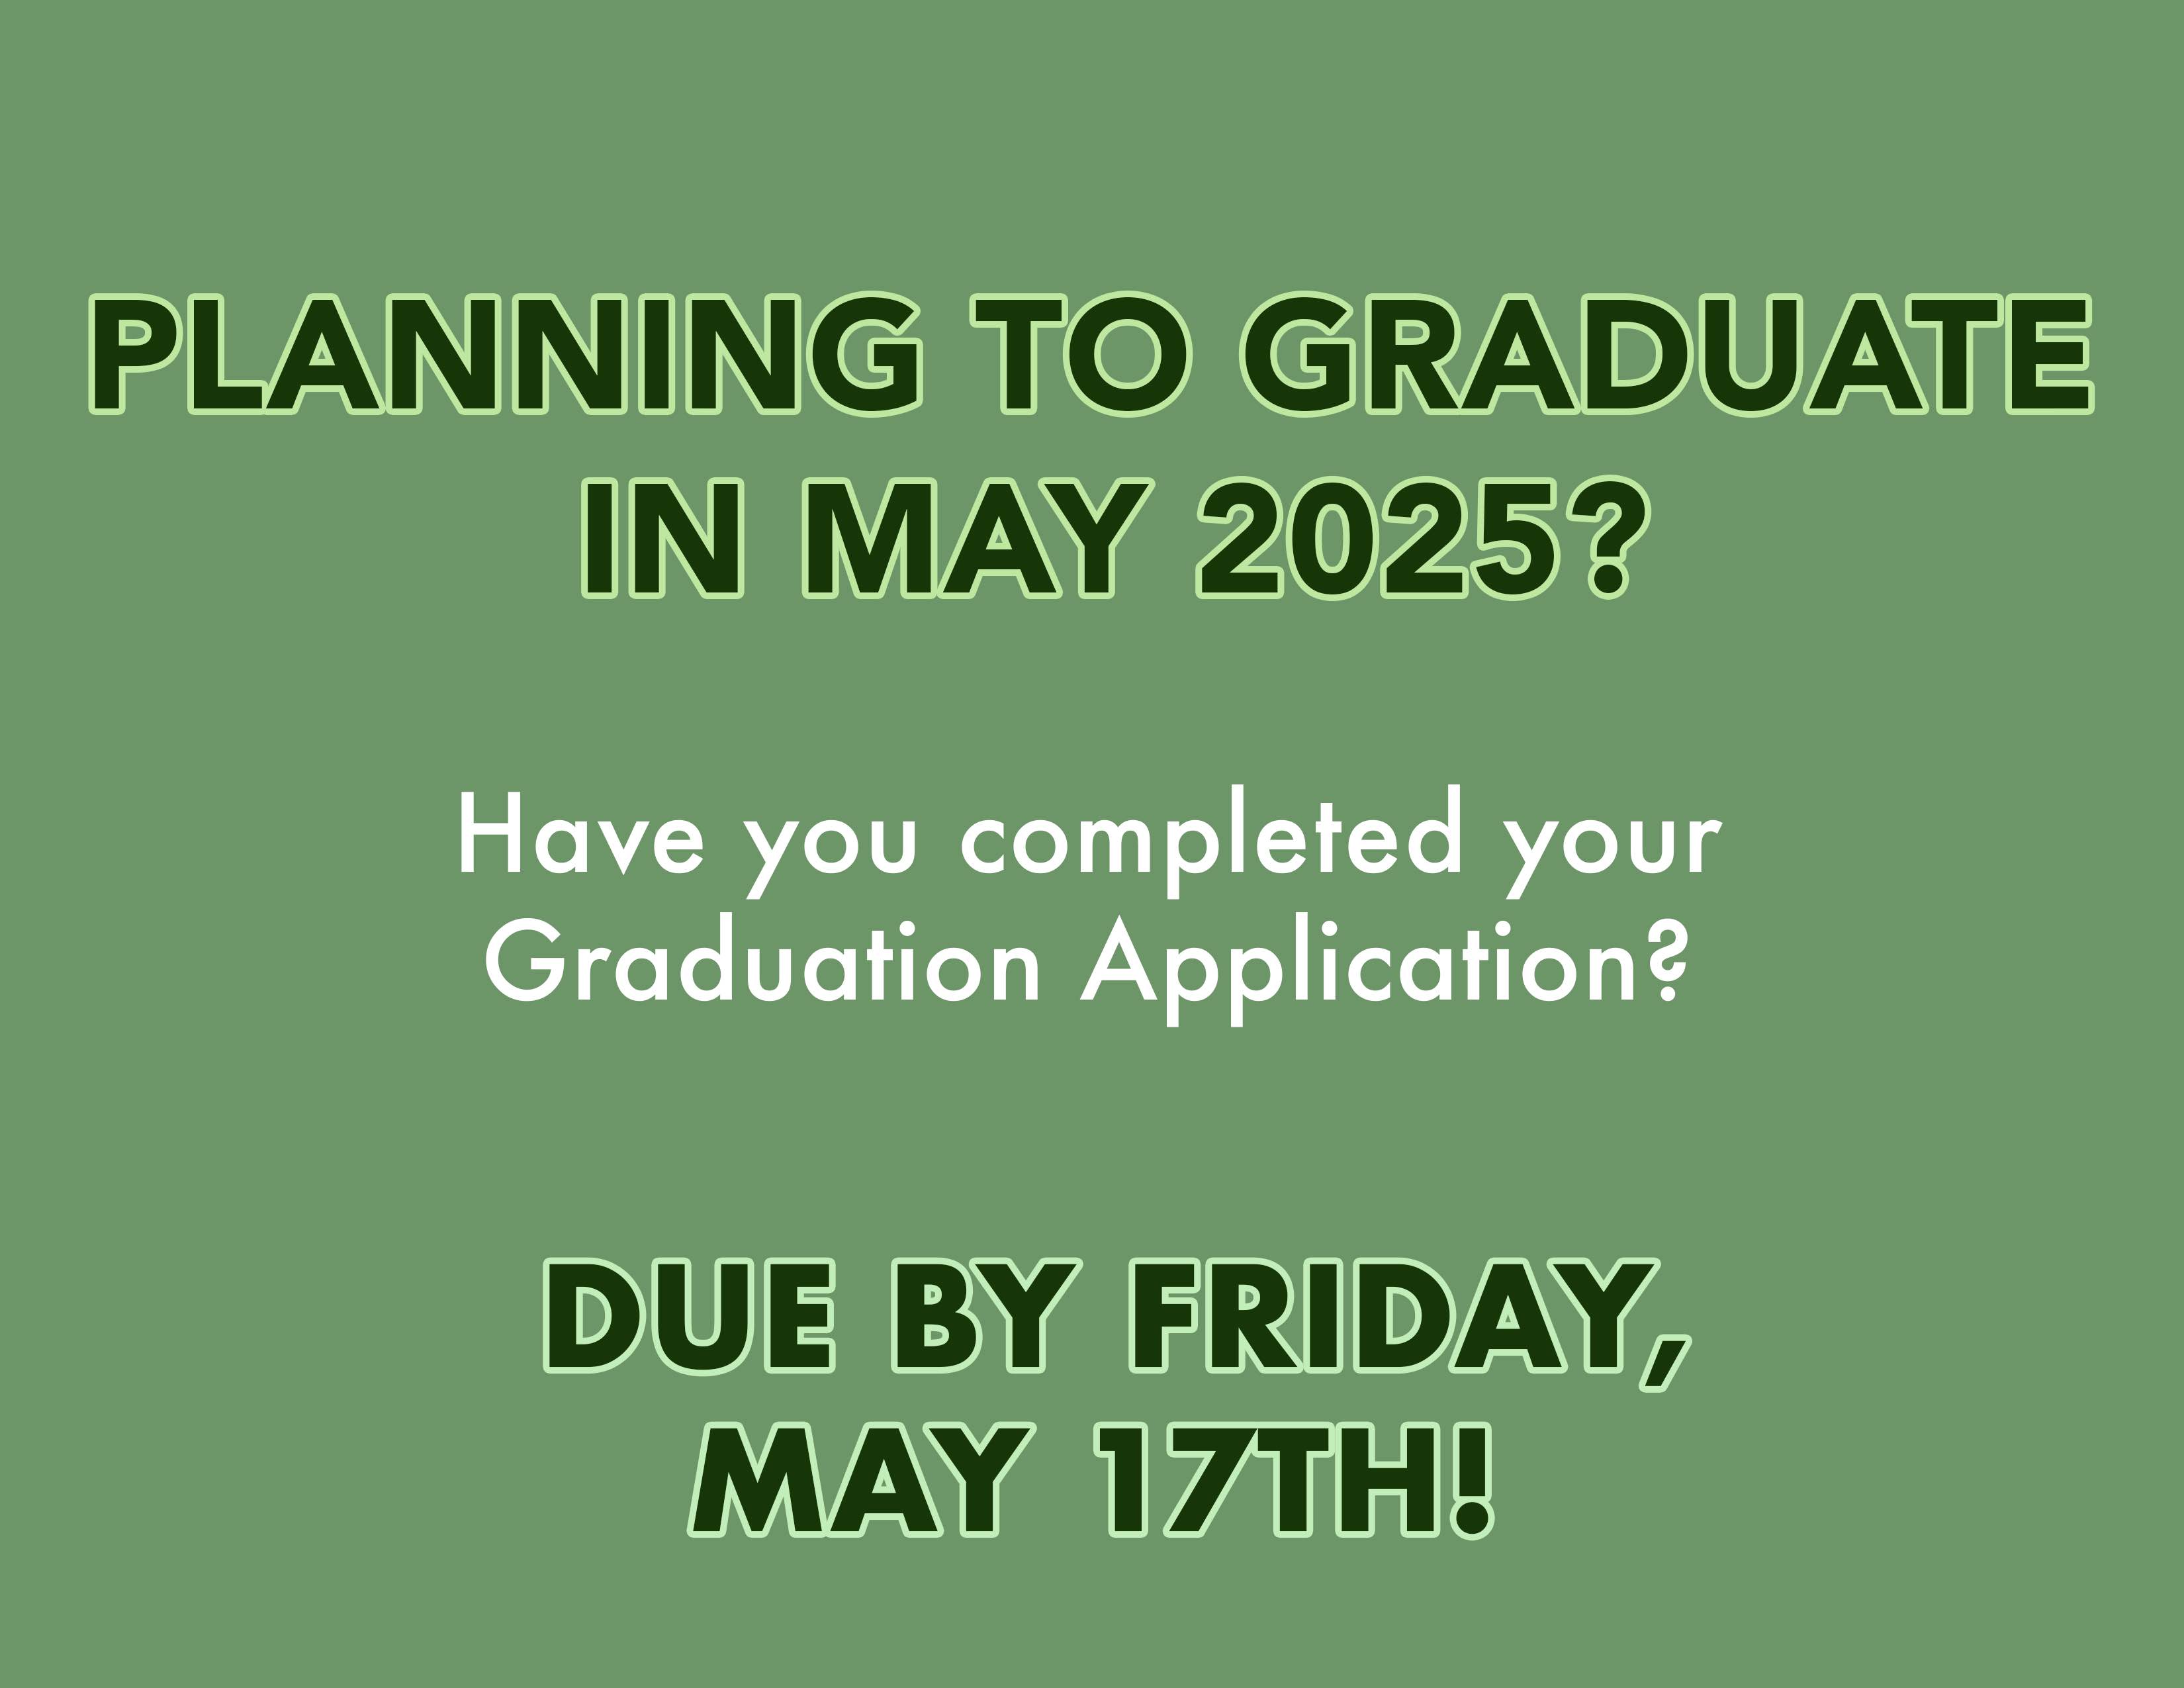 Are you planning to graduate in May 2025?  Have you completed your Graduation Application?  If you think you will complete your degree requirements at the end of the Spring 2025 semester, please review the attached document on how to apply to graduate.  The application to graduate should be completed one year prior to your anticipated graduate date.    To determine if you have already applied, check the Graduation Overview in Self Service.  If you are not able to submit the application, that means you previously submitted it.  If you are not sure when you will graduate please look at your Progress on Self Service.  The Progress section will show you what requirements are missing for graduation.  Please consult with your advisor if you have questions regarding your program and graduation status.